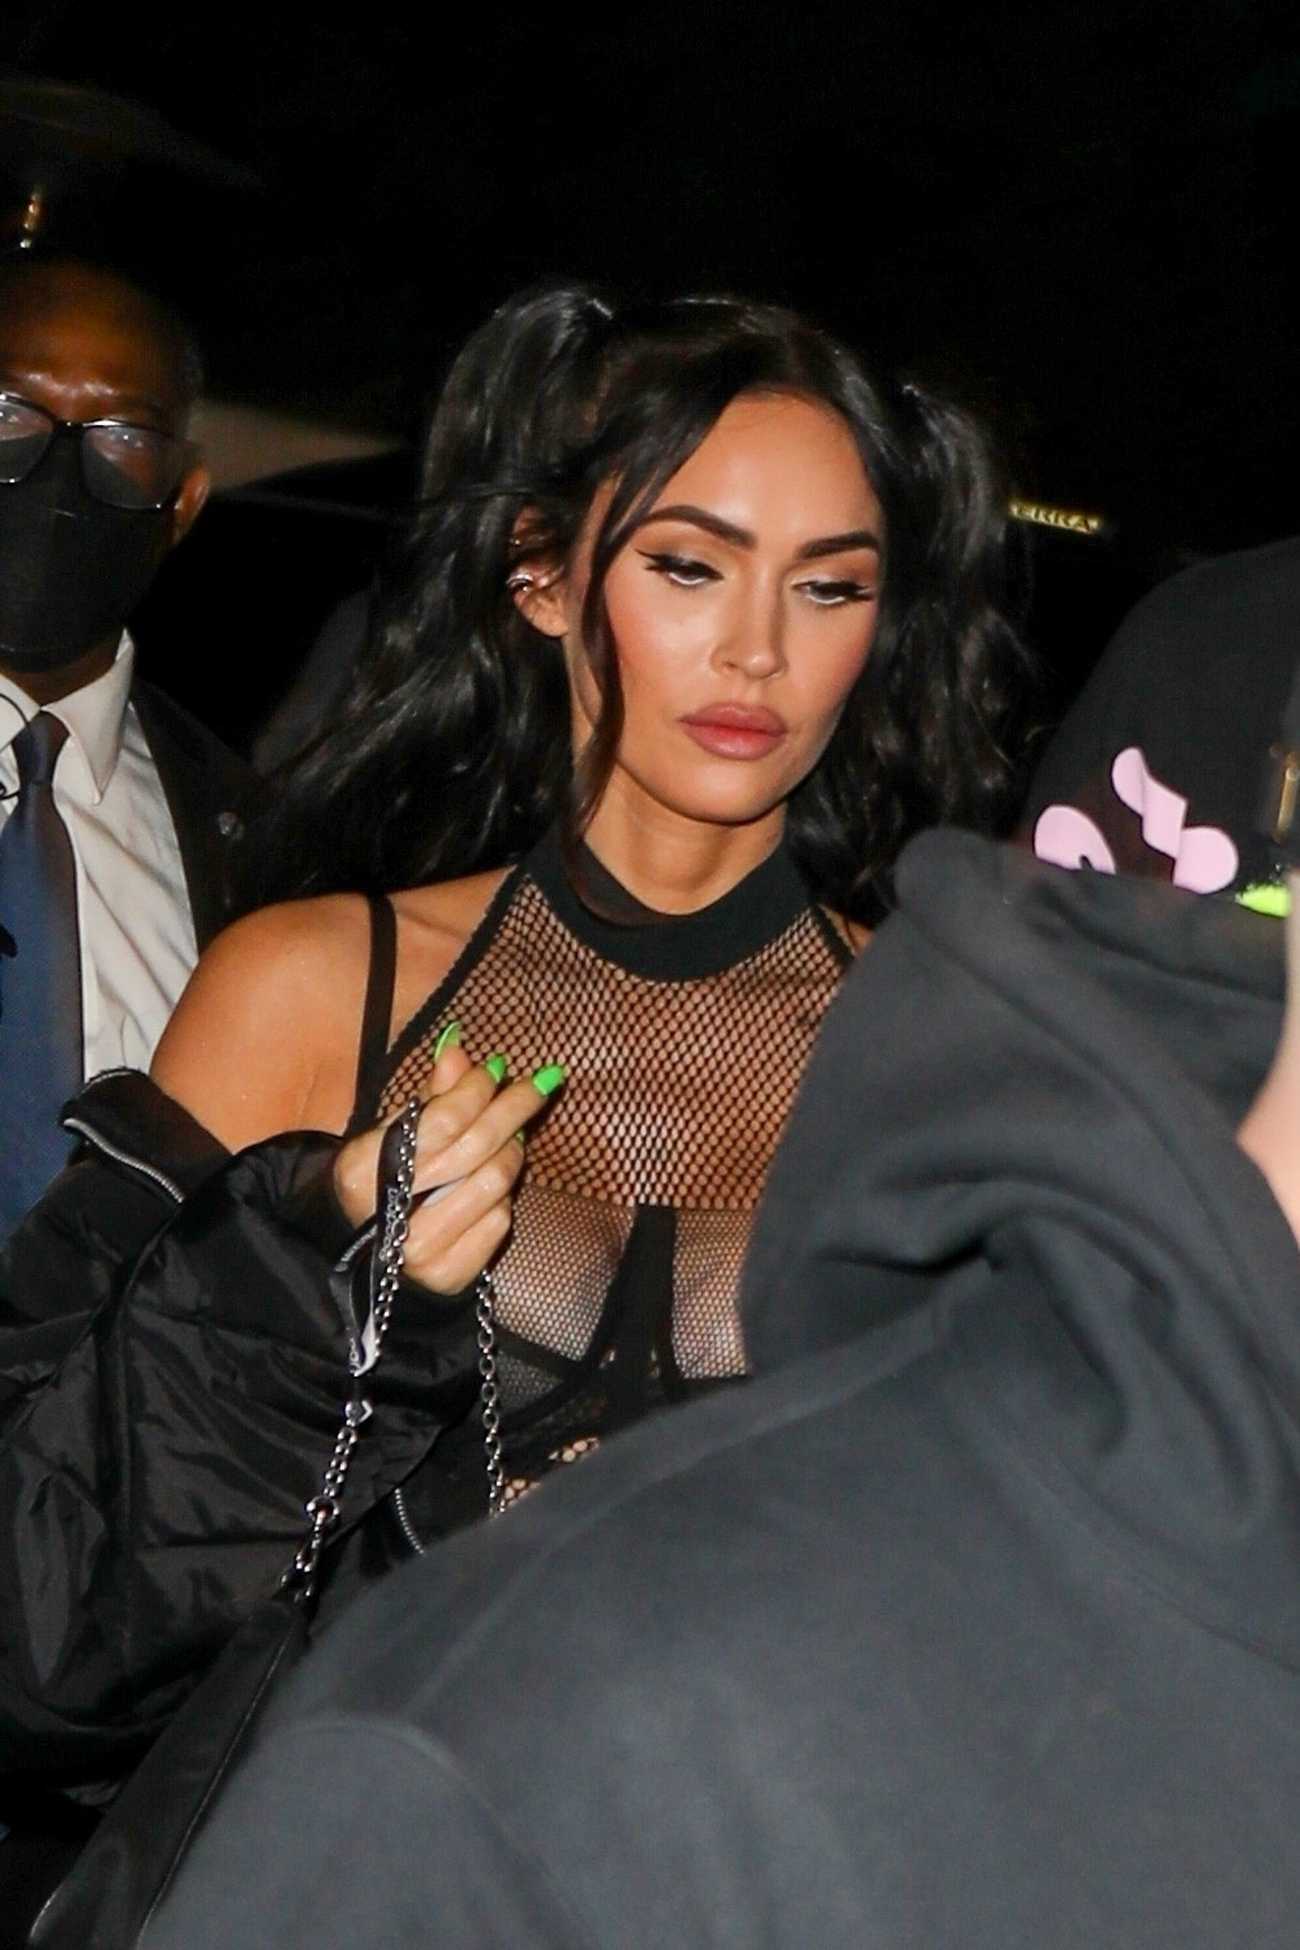 Megan Fox at Avril Lavigne’s concert at the The Roxy Theatre in West Hollywood on February 25